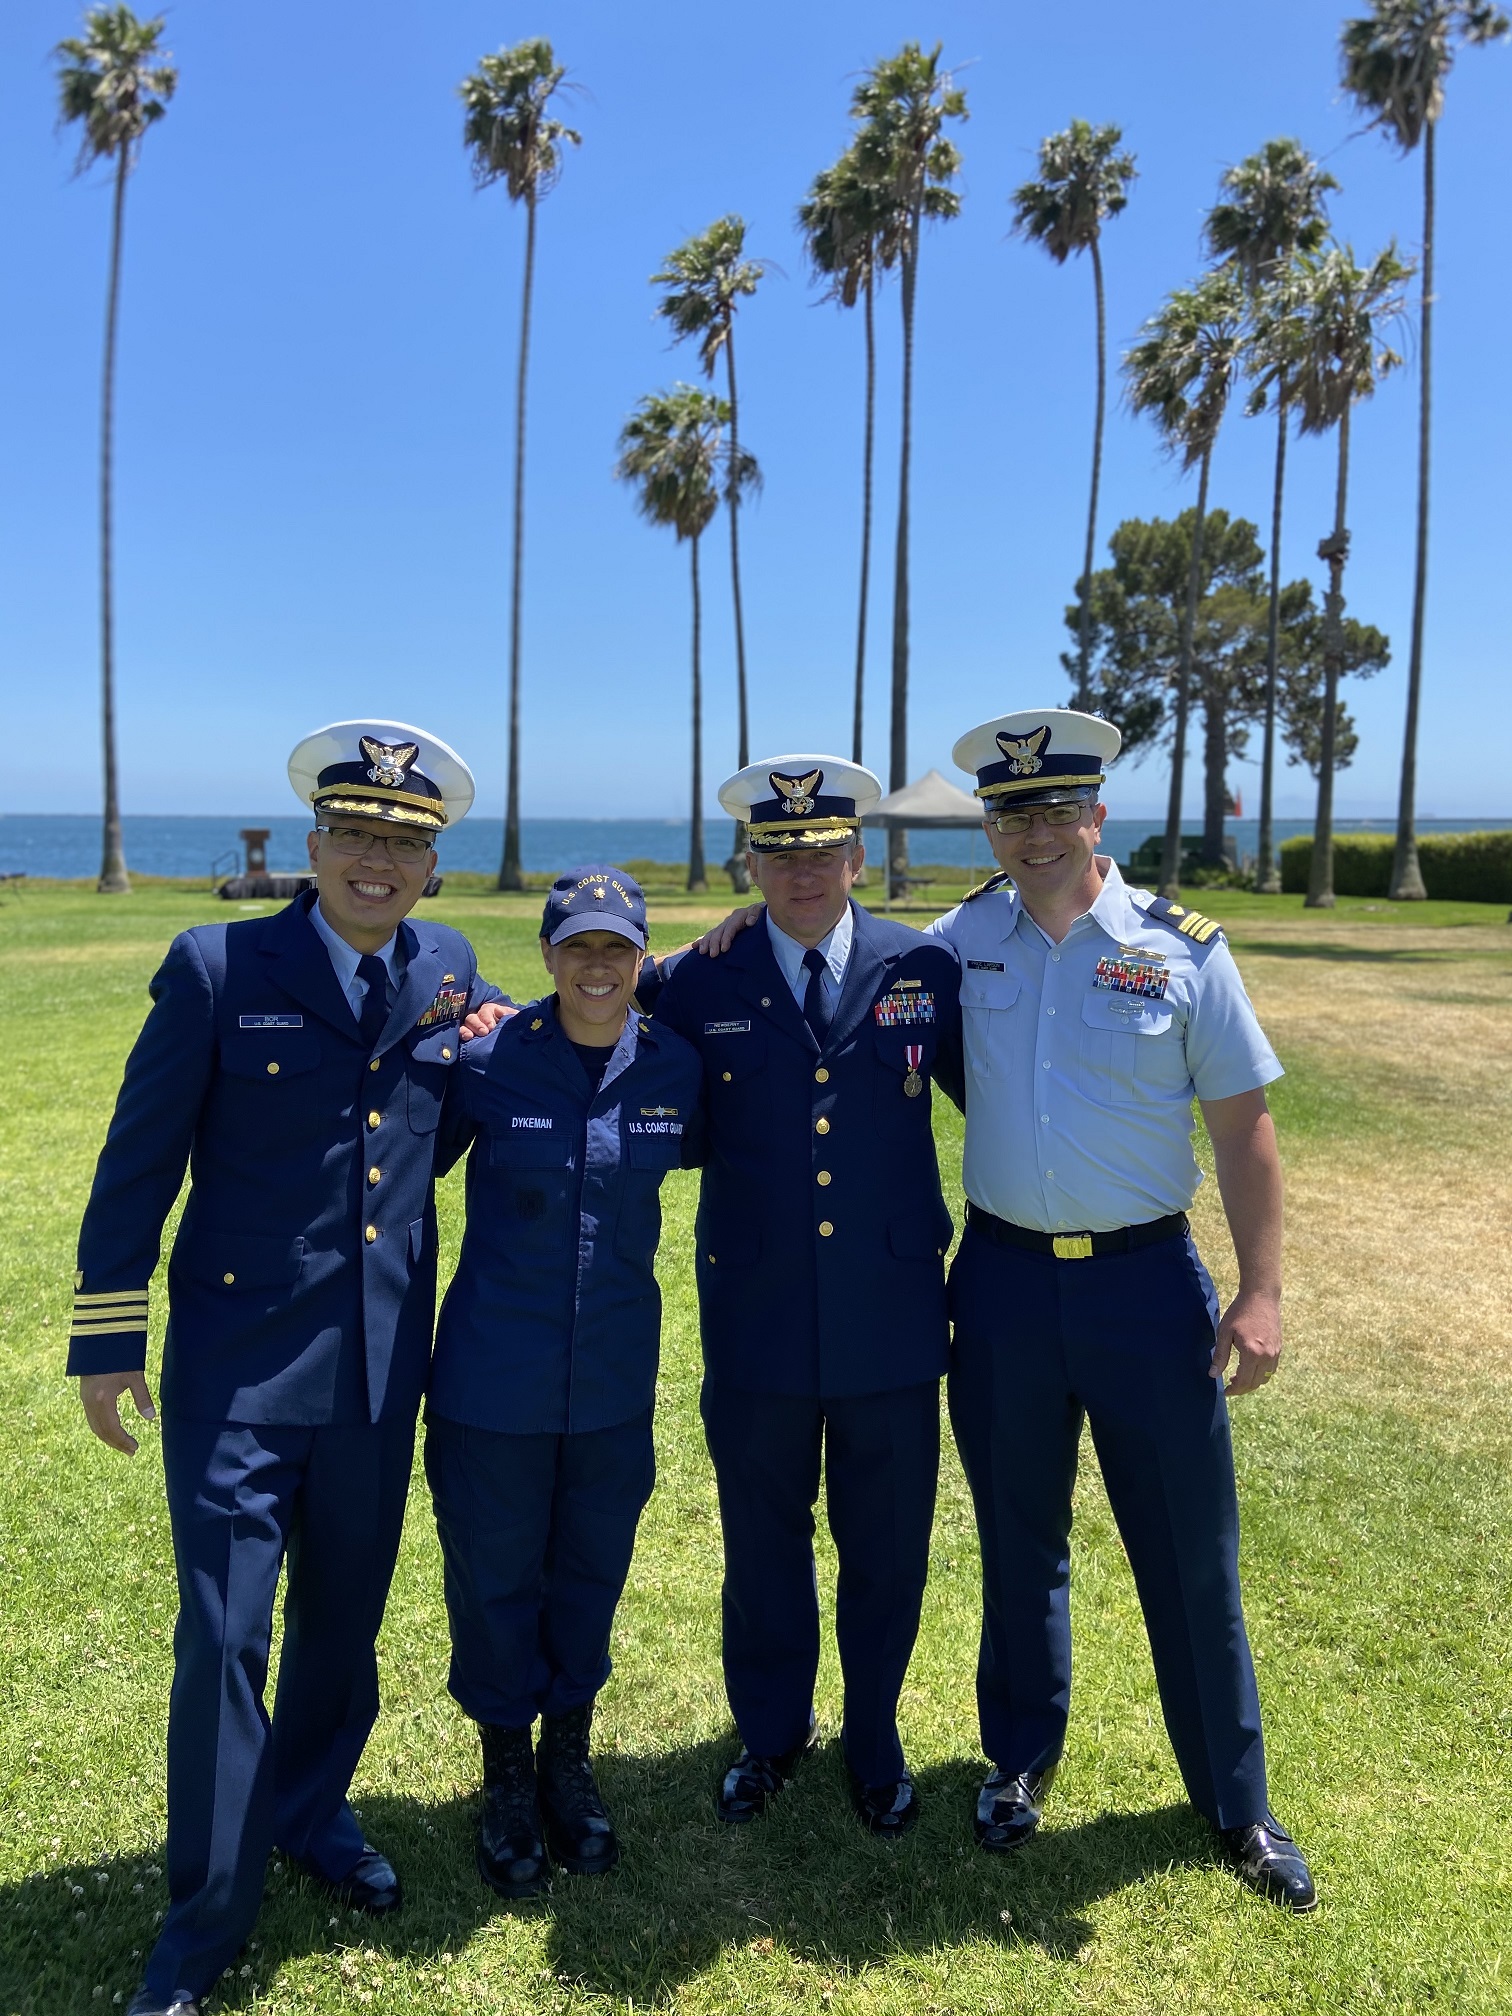 Cmdr. Stephen Bor (far left), the Chief of Prevention for Sector Los Angeles-Long Beach and winner of the Capt. David H. Jarvis Award for Inspirational Leadership poses with team members from U.S. Coast Guard Sector Los Angeles/Long Beach (U.S. Coast Guard photo)